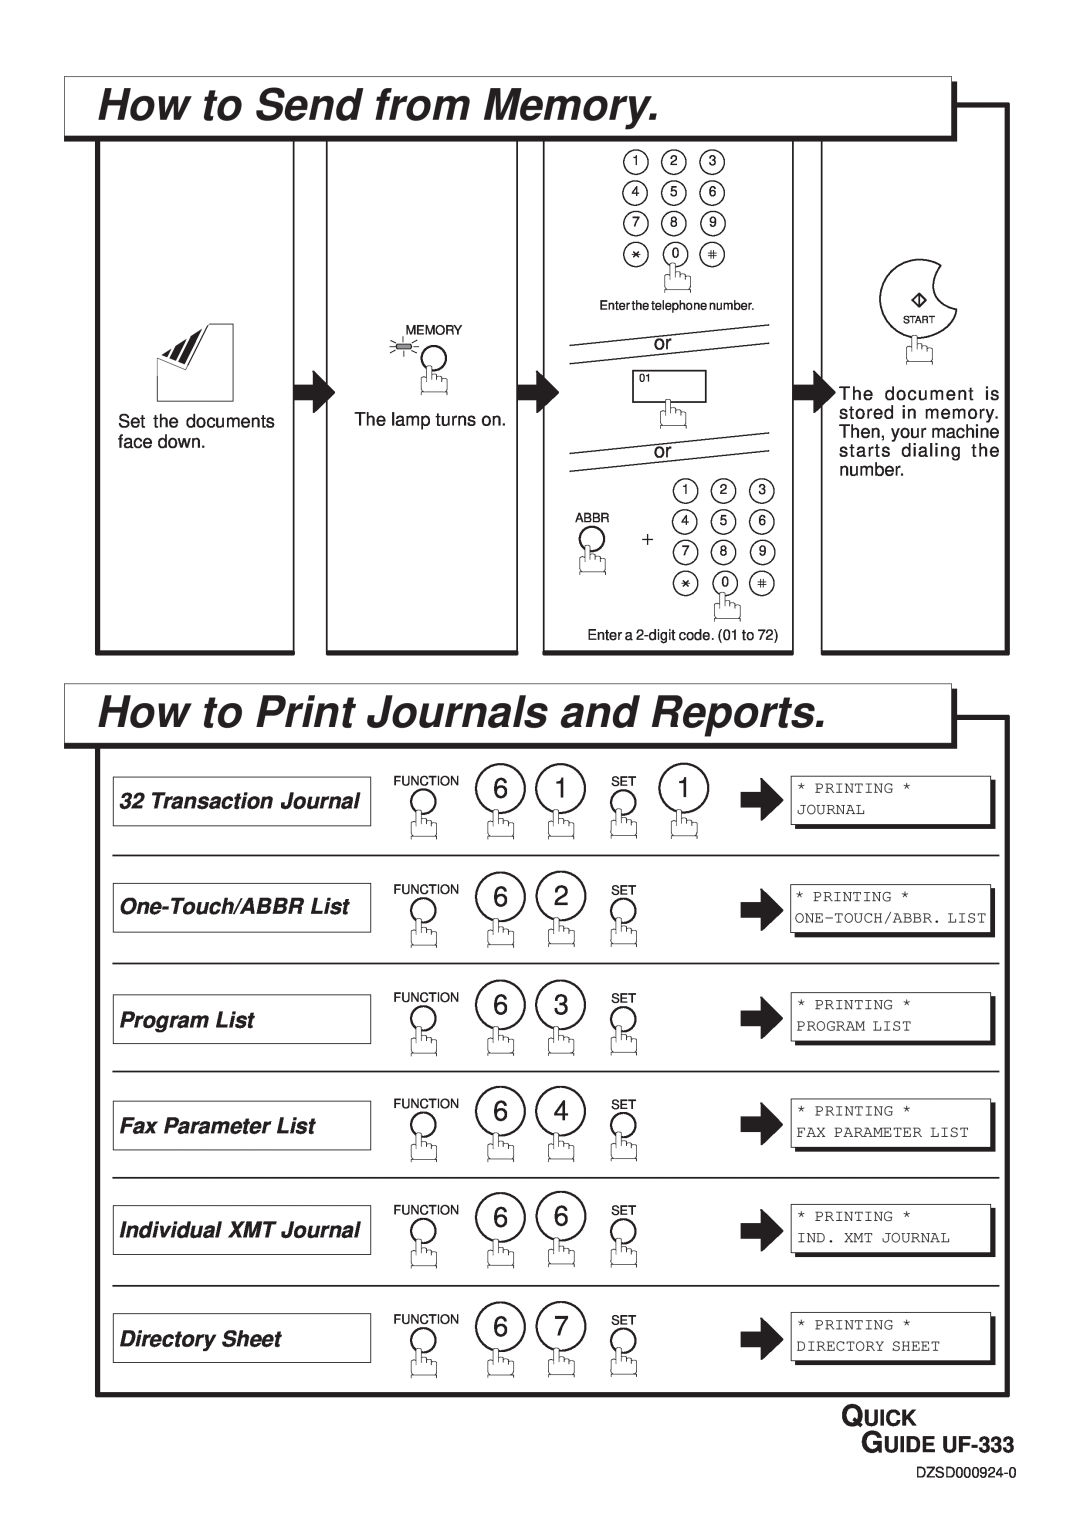 Panasonic How to Send from Memory, How to Print Journals and Reports, QUICK GUIDE UF-333, Transaction Journal, Printing 